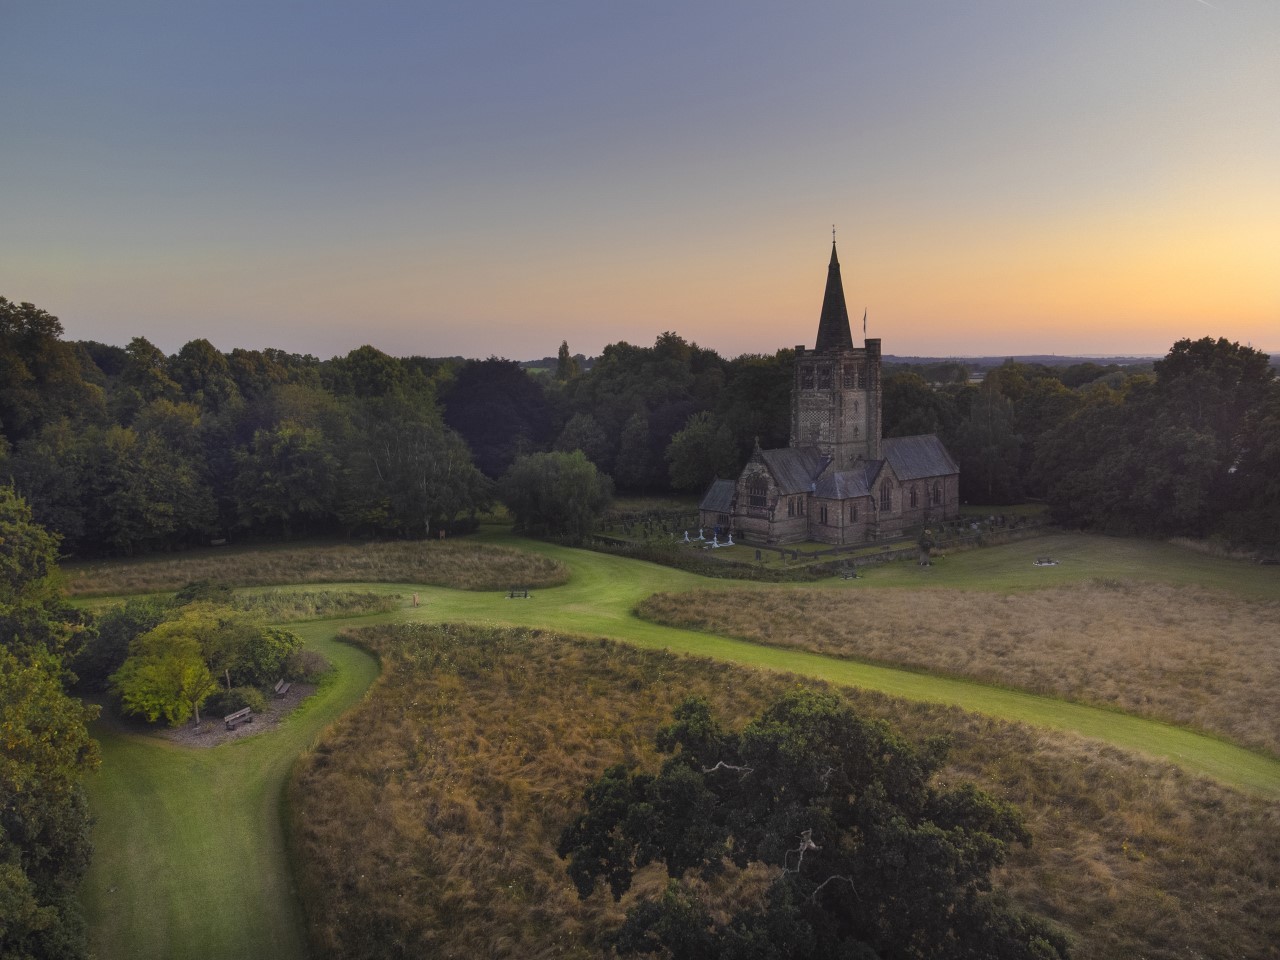 St Johns Church in Walton. This was one of Rays first attempts at Drone photography.